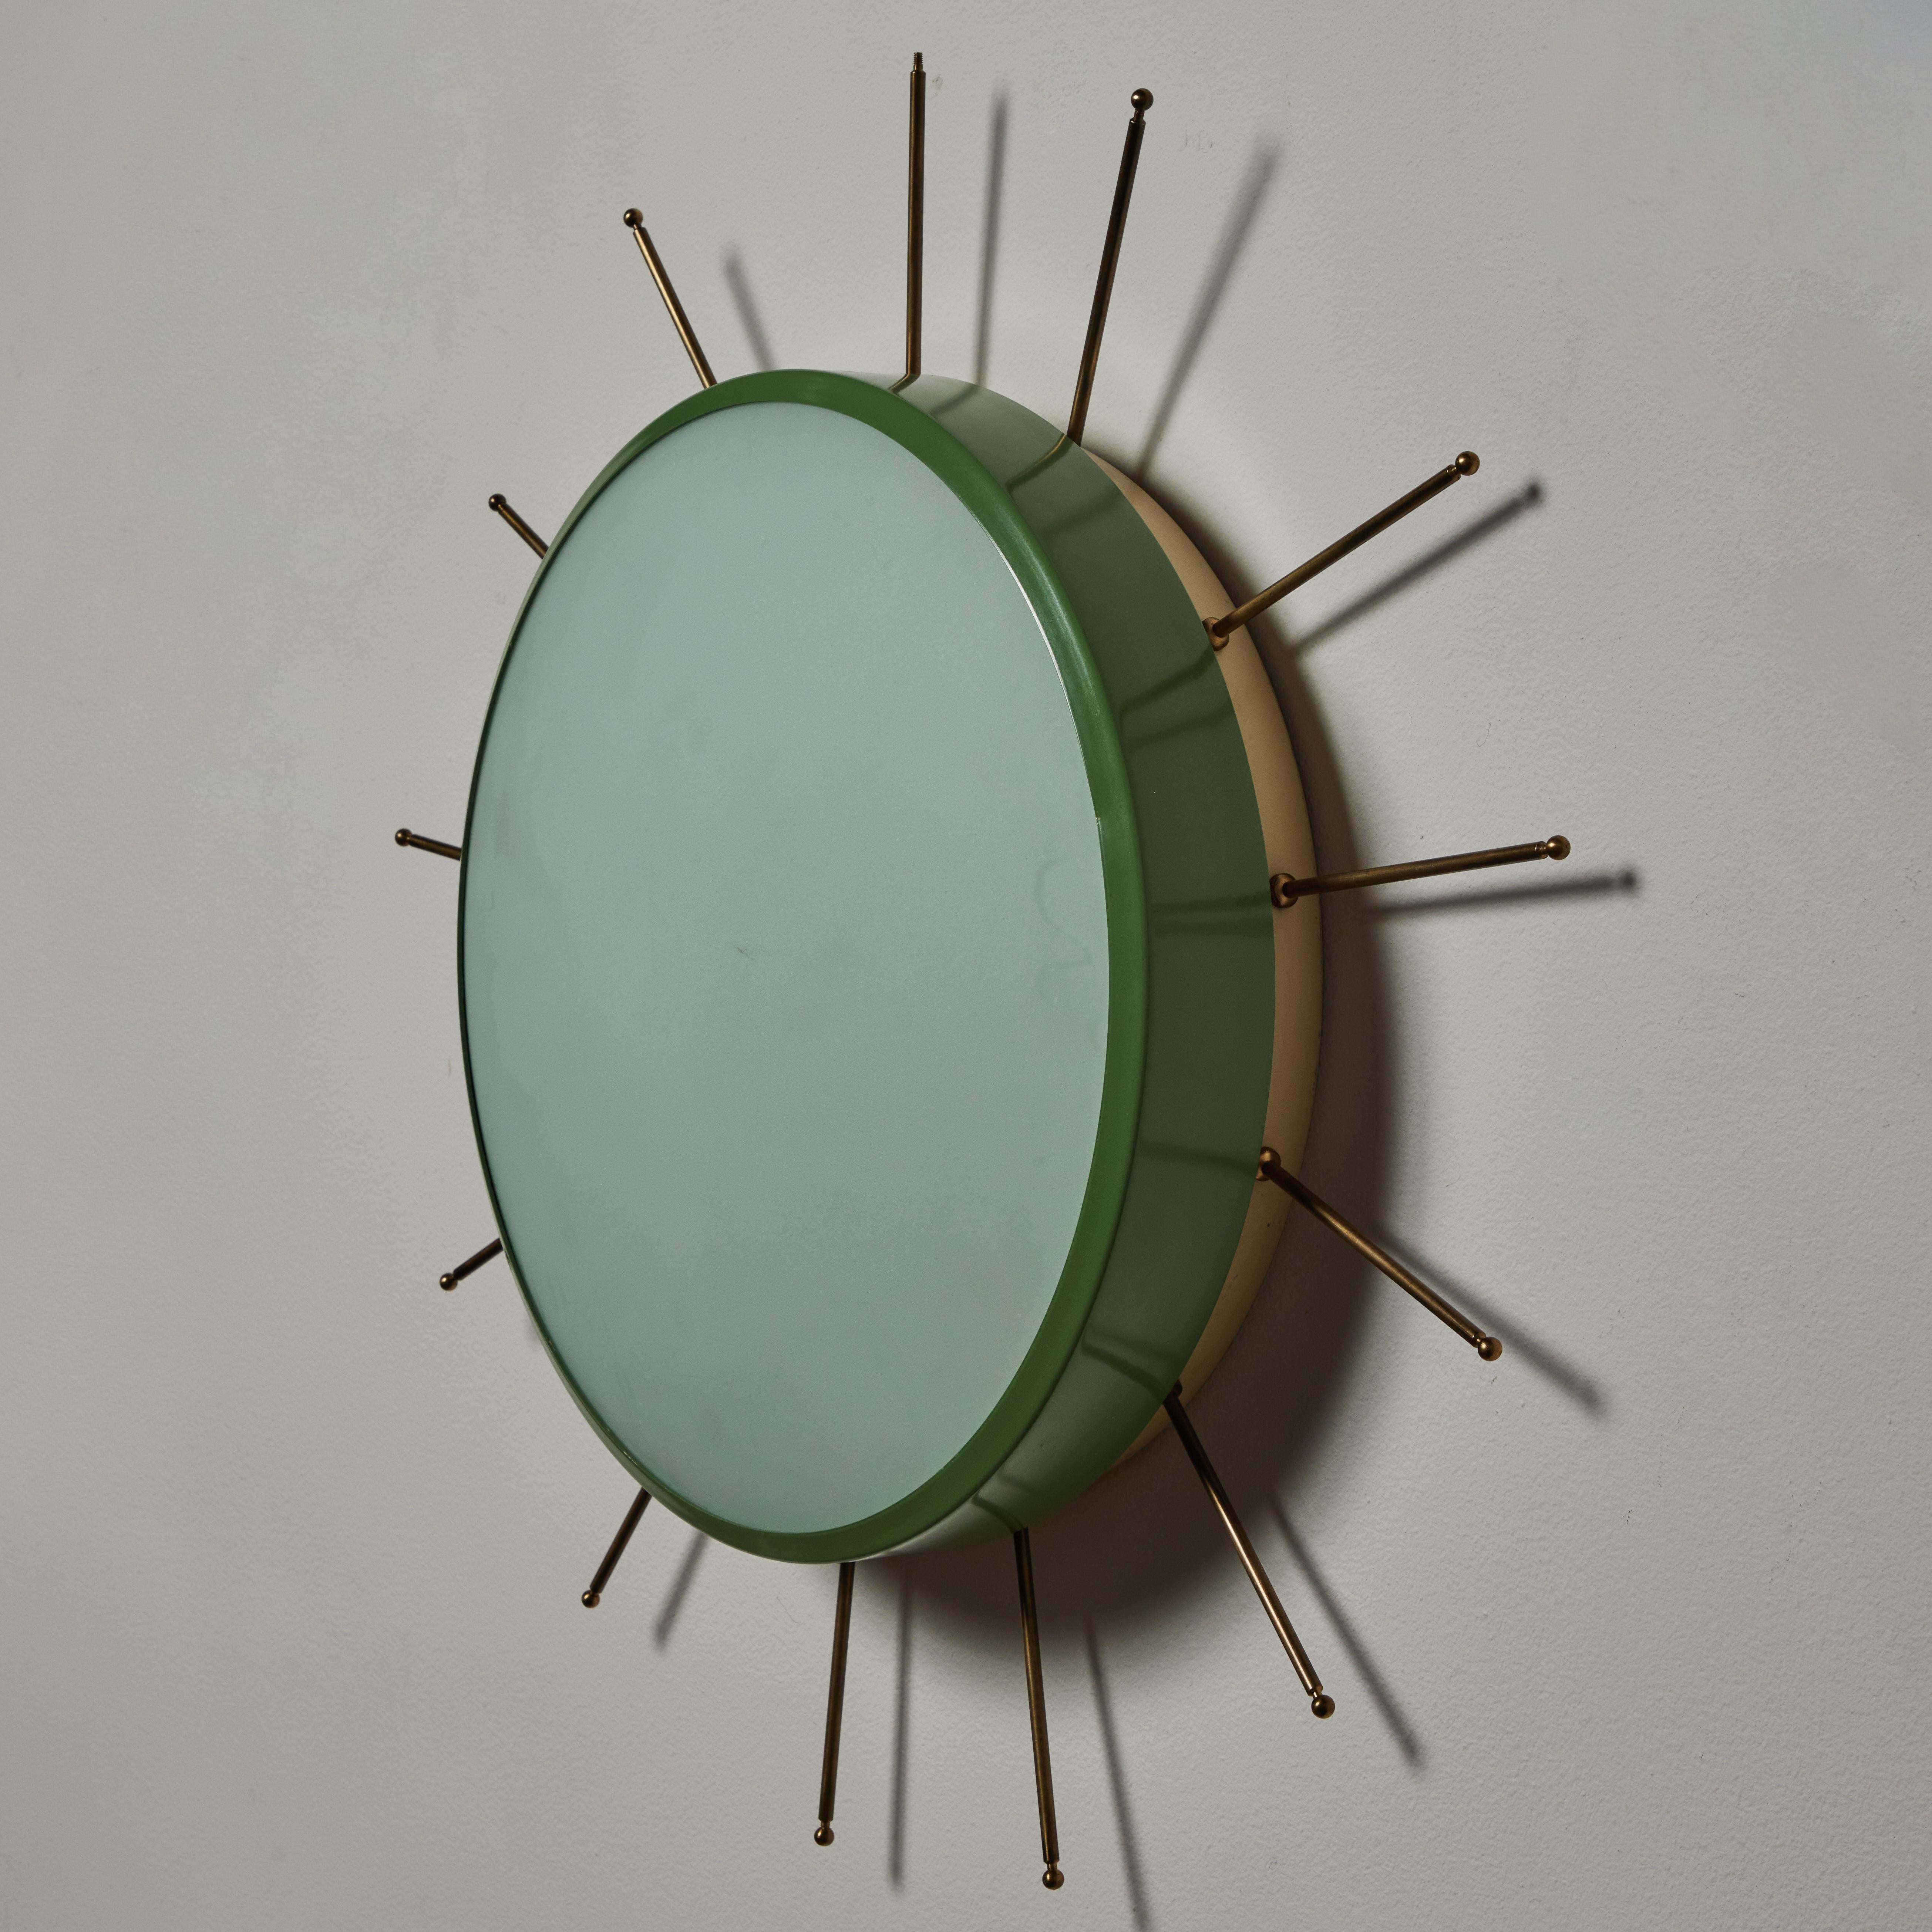 Single green flush mount wall/ ceiling light by G.C.M.E. Designed and manufactured in Italy, circa 1960's Lacquered metal structure, glass diffusers and brass details. Rewired for U.S. standards. Takes Two E27 60w maximum bulbs. Bulbs not included.